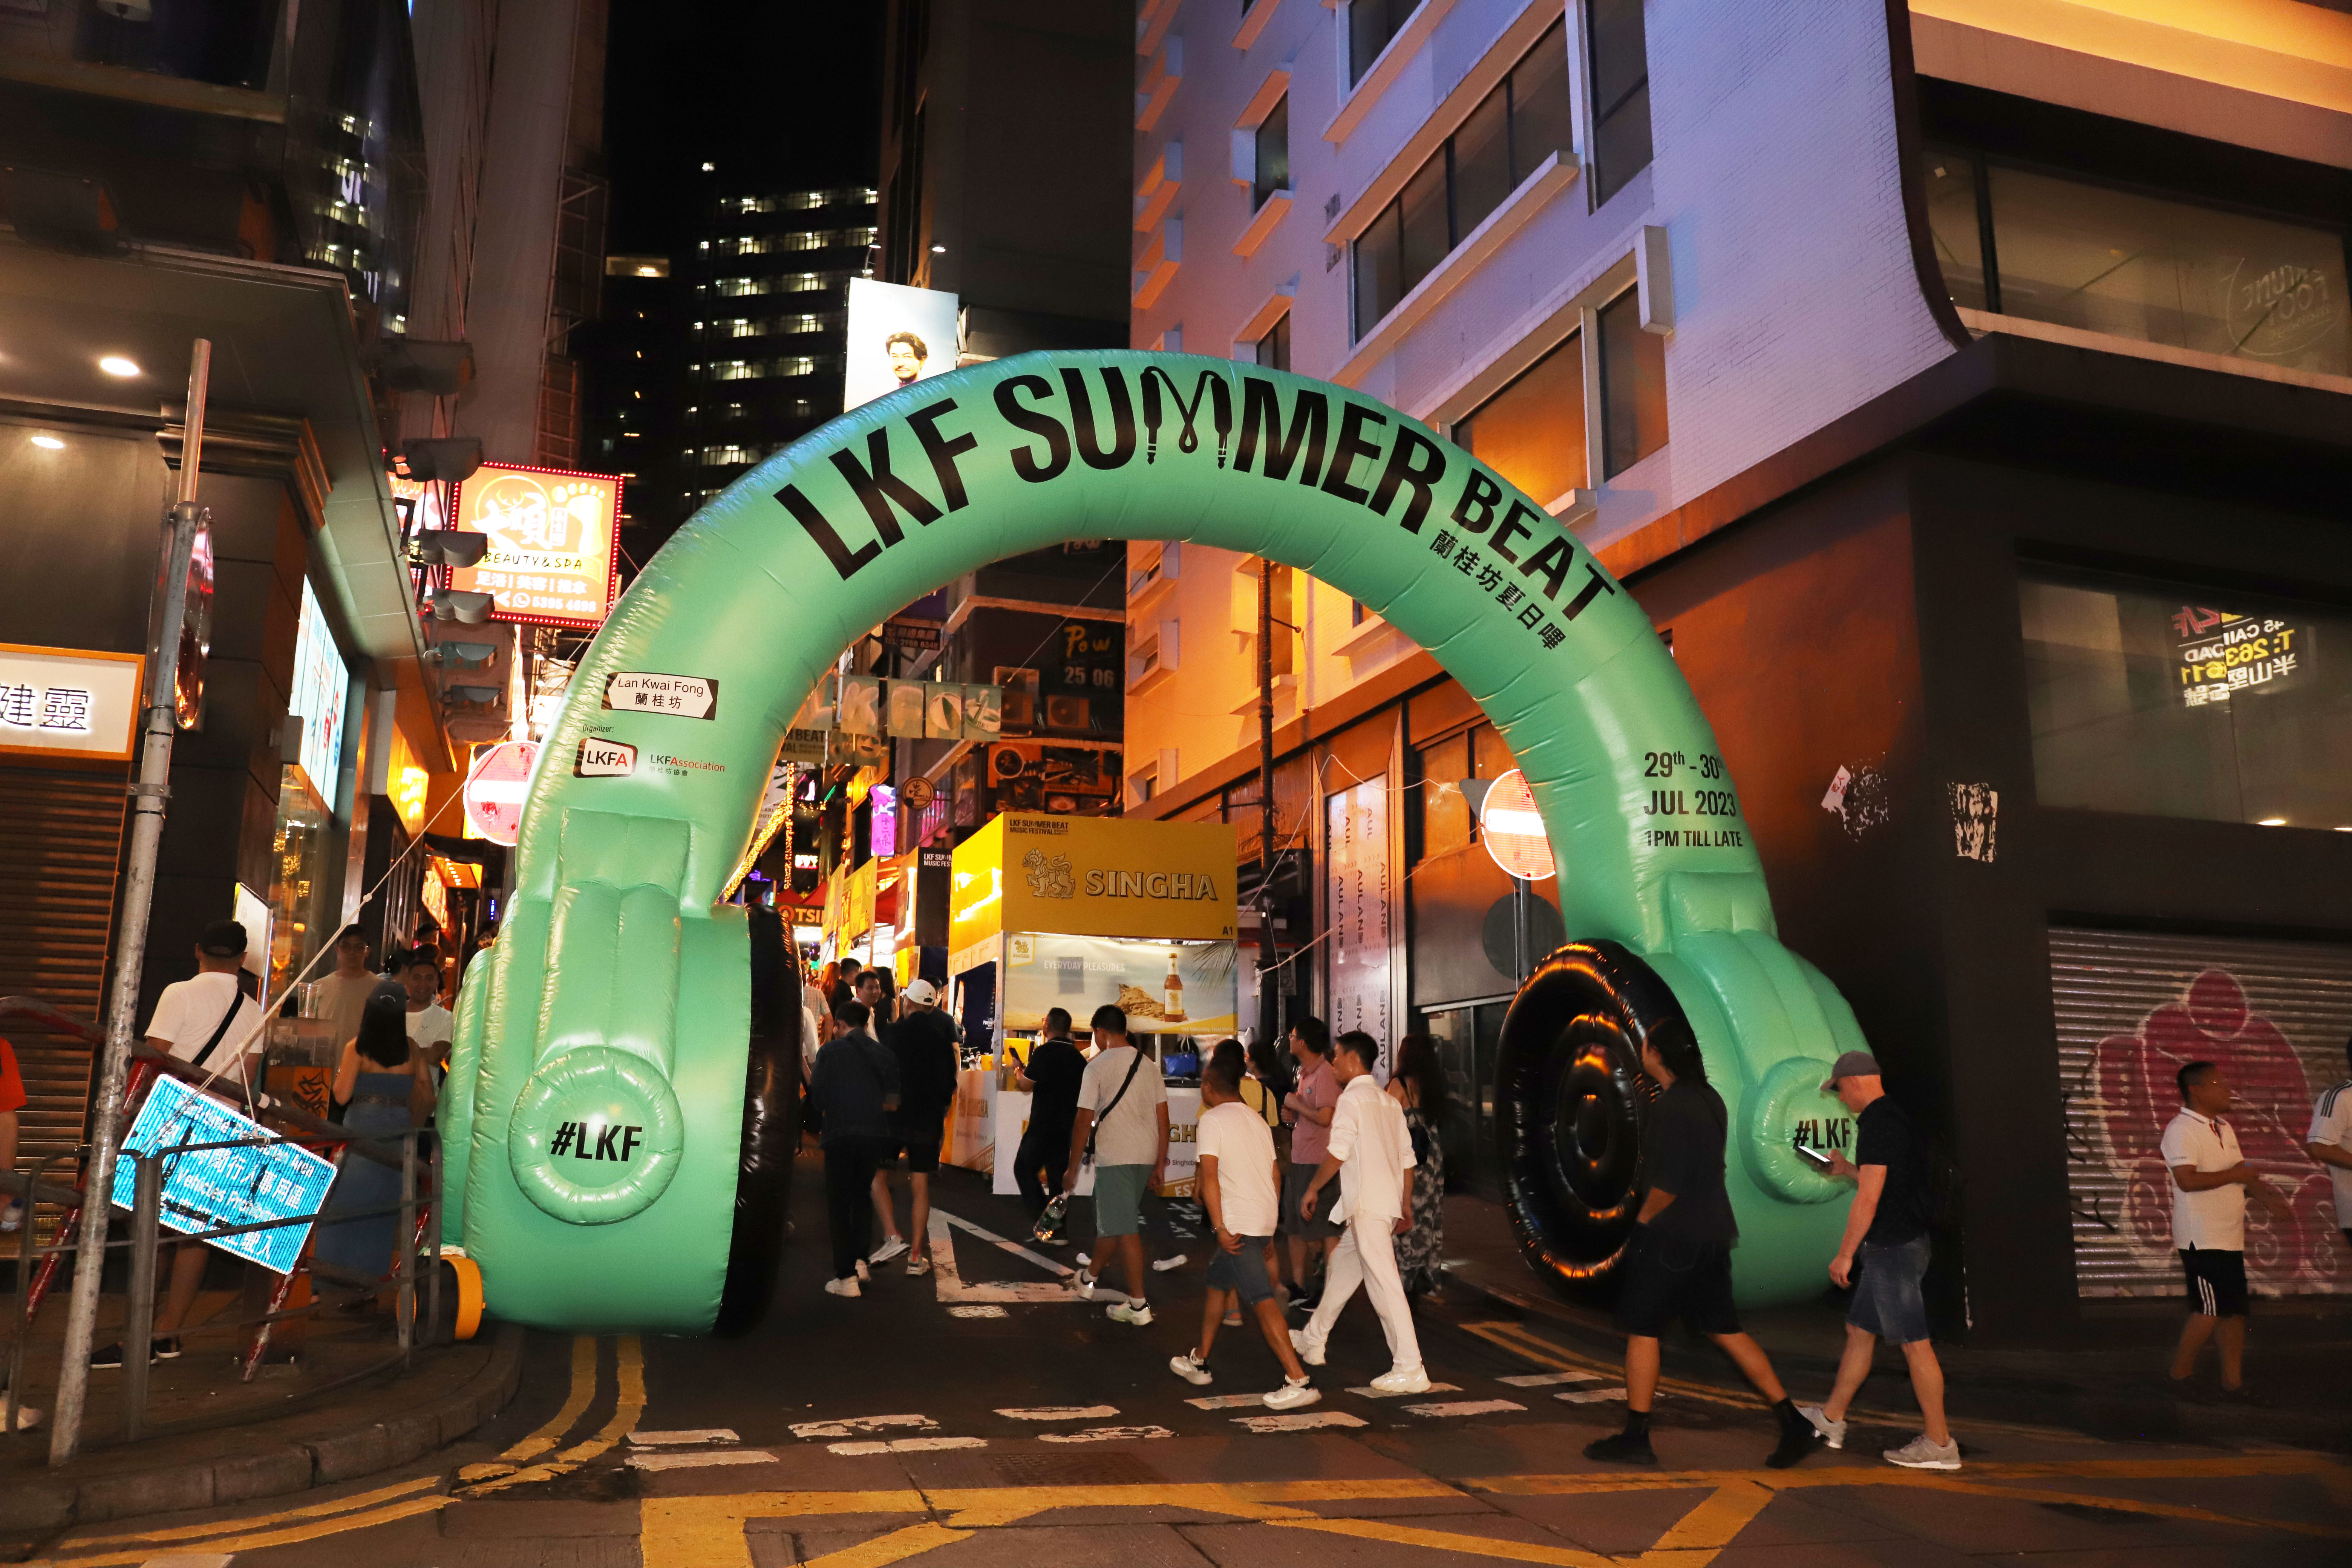 LKF Summer Beat Music Festival 2023 attracted more than 10,000 people and tourists for an unforgettable two-day celebration of music and global flavors.